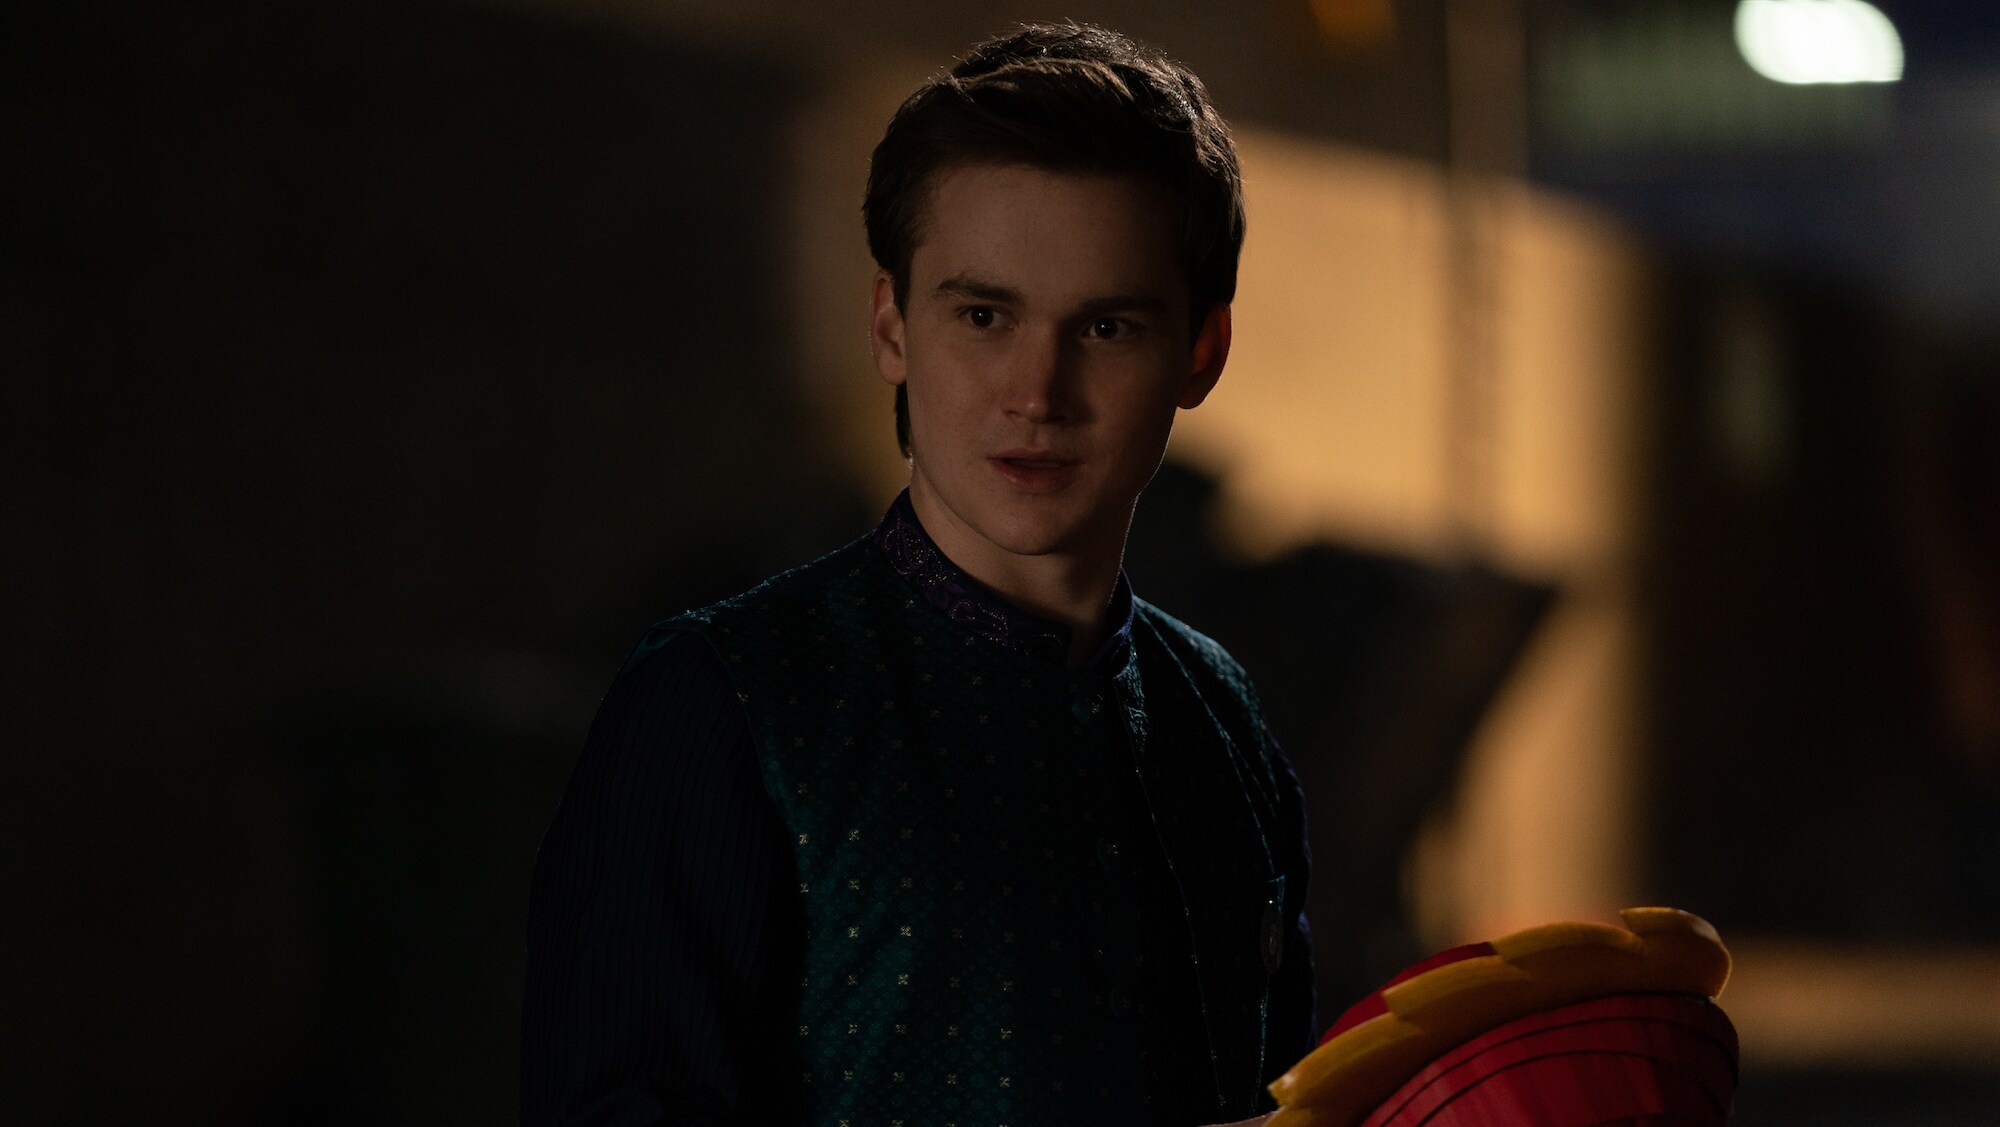 Matthew Lintz as Bruno in Marvel Studios' MS. MARVEL, exclusively on Disney+. Photo by Daniel McFadden. ©Marvel Studios 2022. All Rights Reserved.